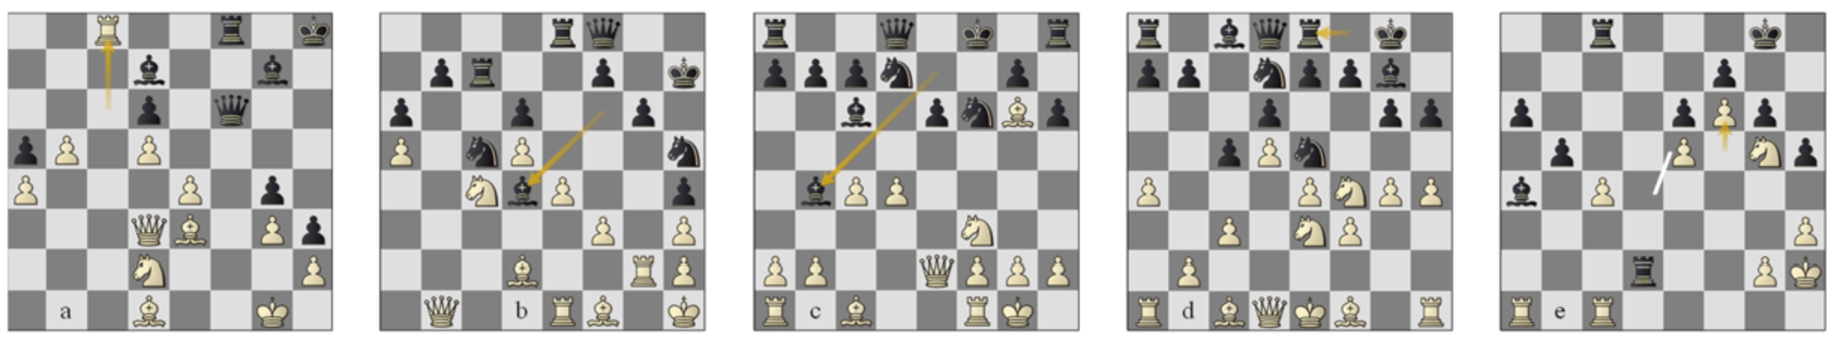 ‘Win on horizon’ positions in the last five decisive games: Semi-finals, a) game 7 Ko-Lc pos. 41b, (b) g8 Lc-Ko p32w, (c) g9 St-Sv p13w; (d) Bronze final g6 Sv-Ko p17w; (e) Final g2 St-Lc p37b.